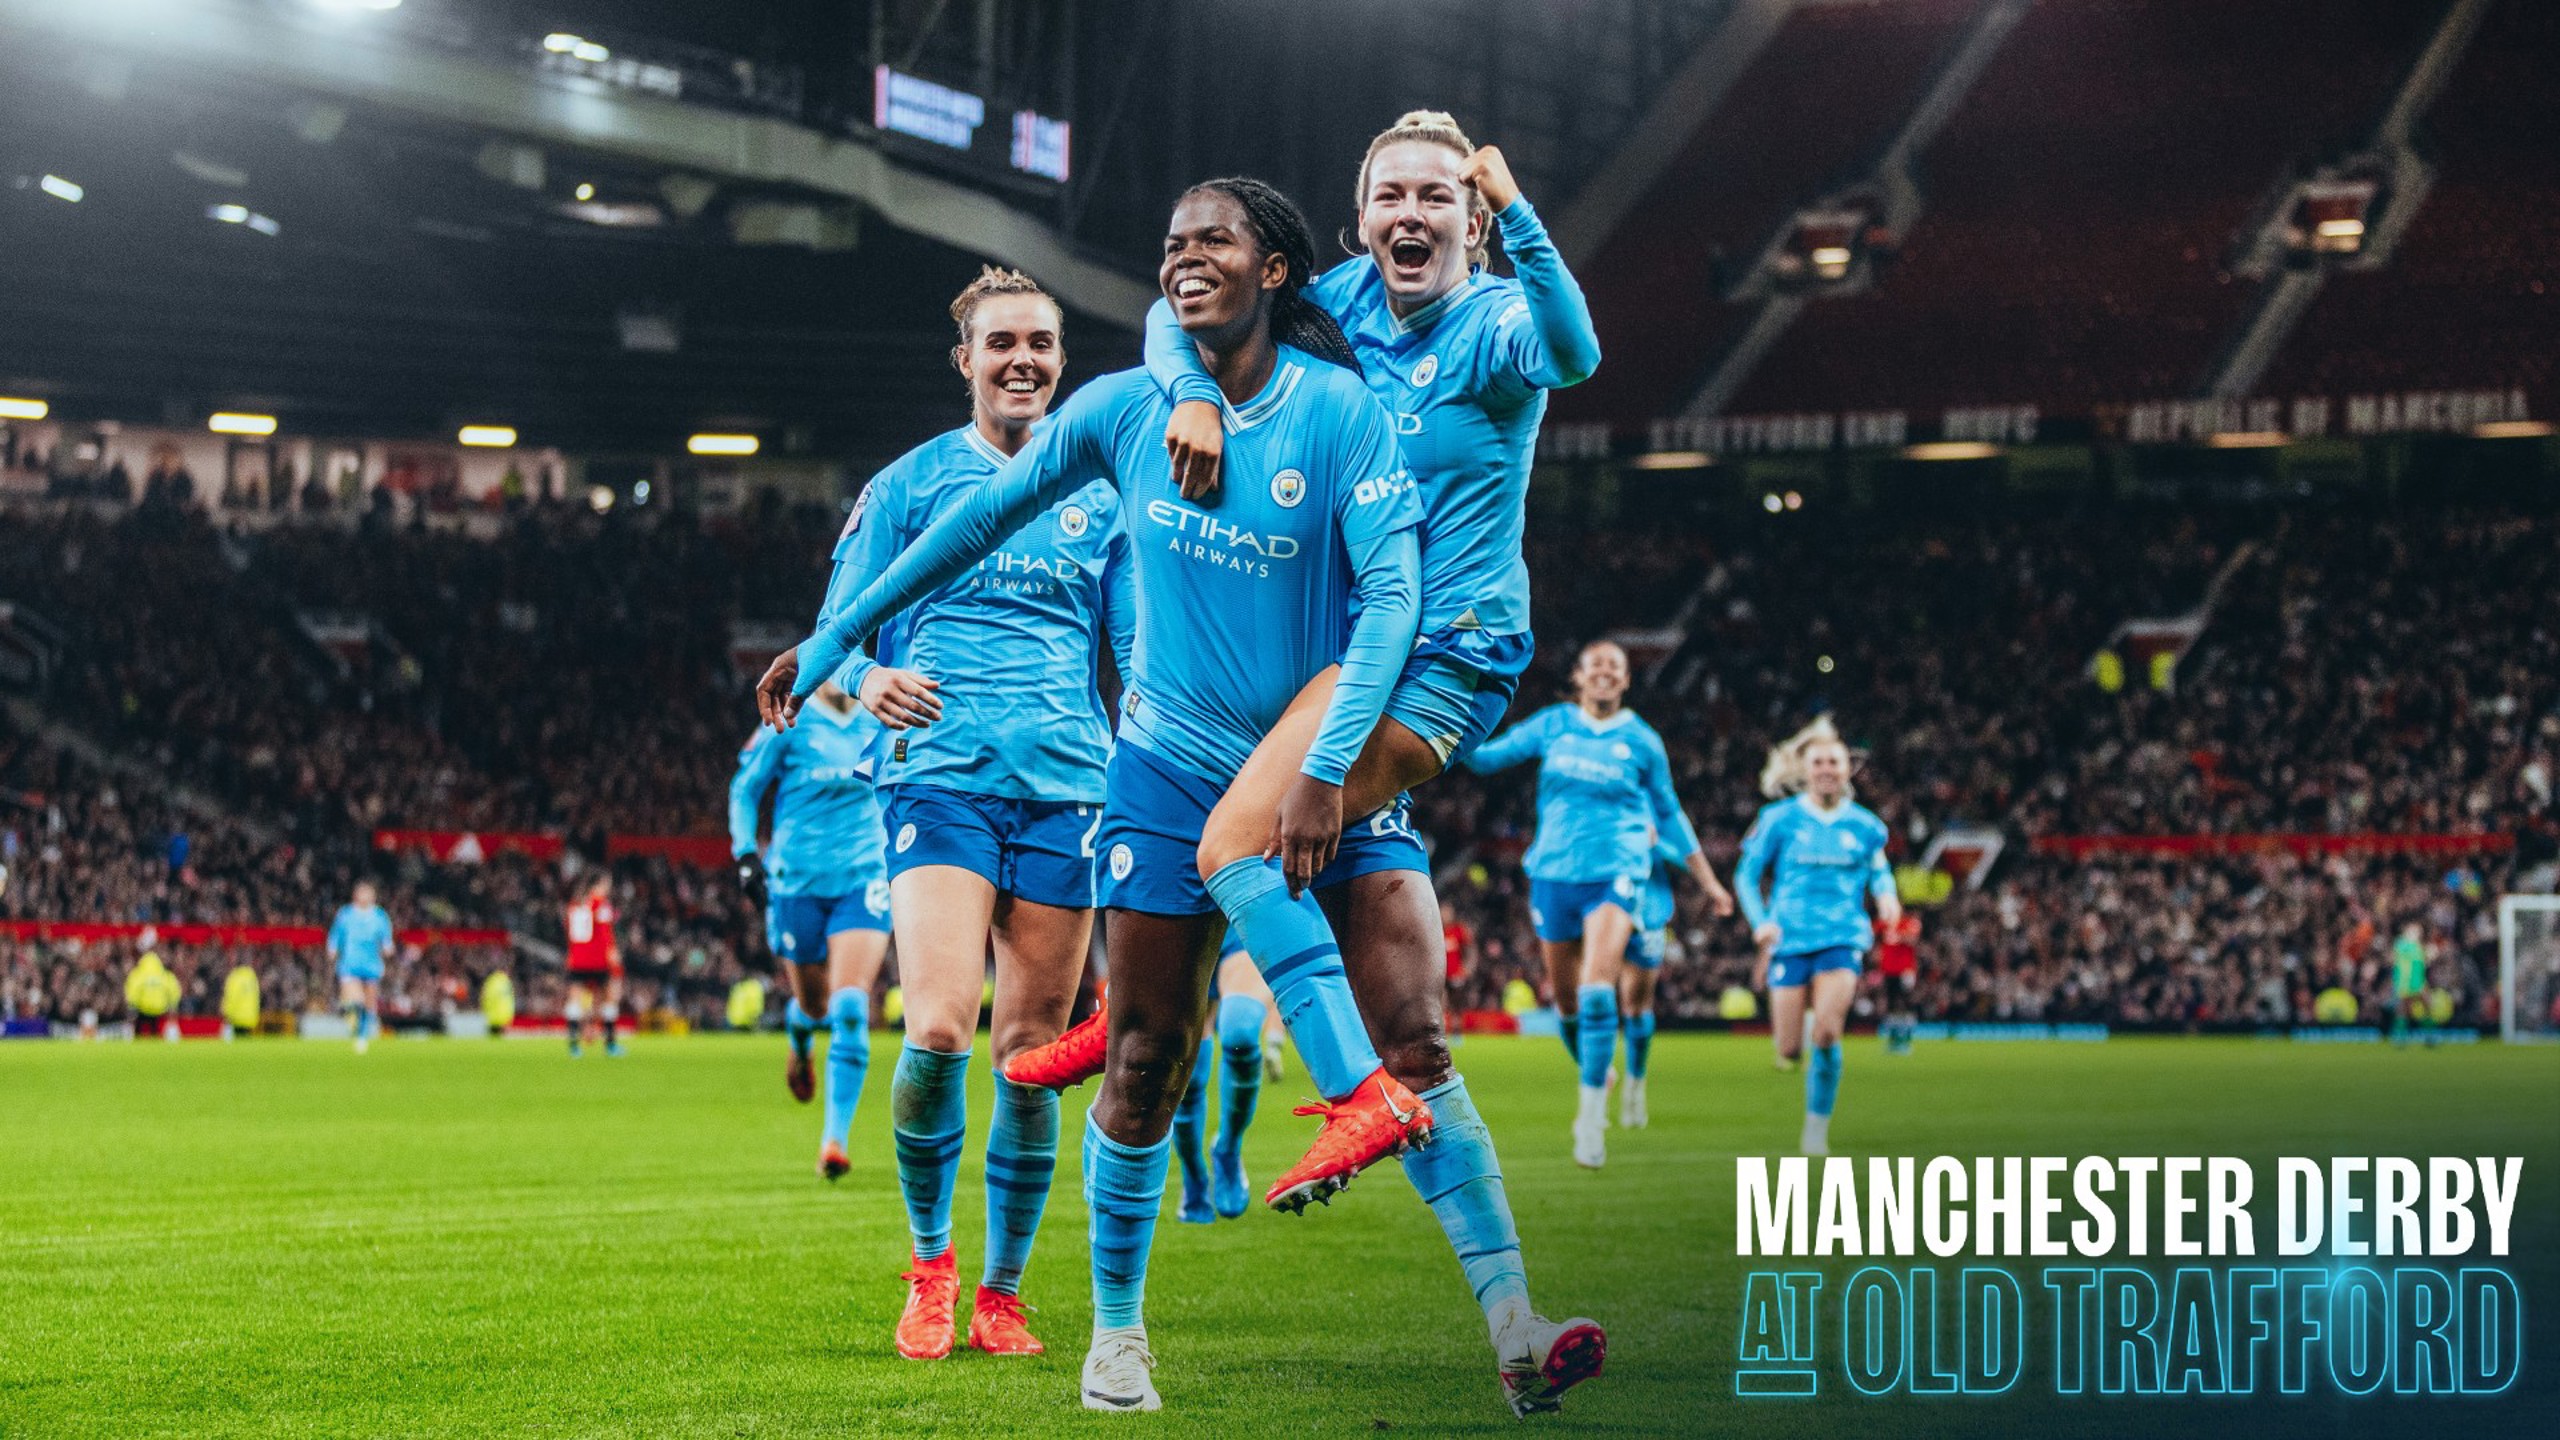 Derby delight for super City at Old Trafford